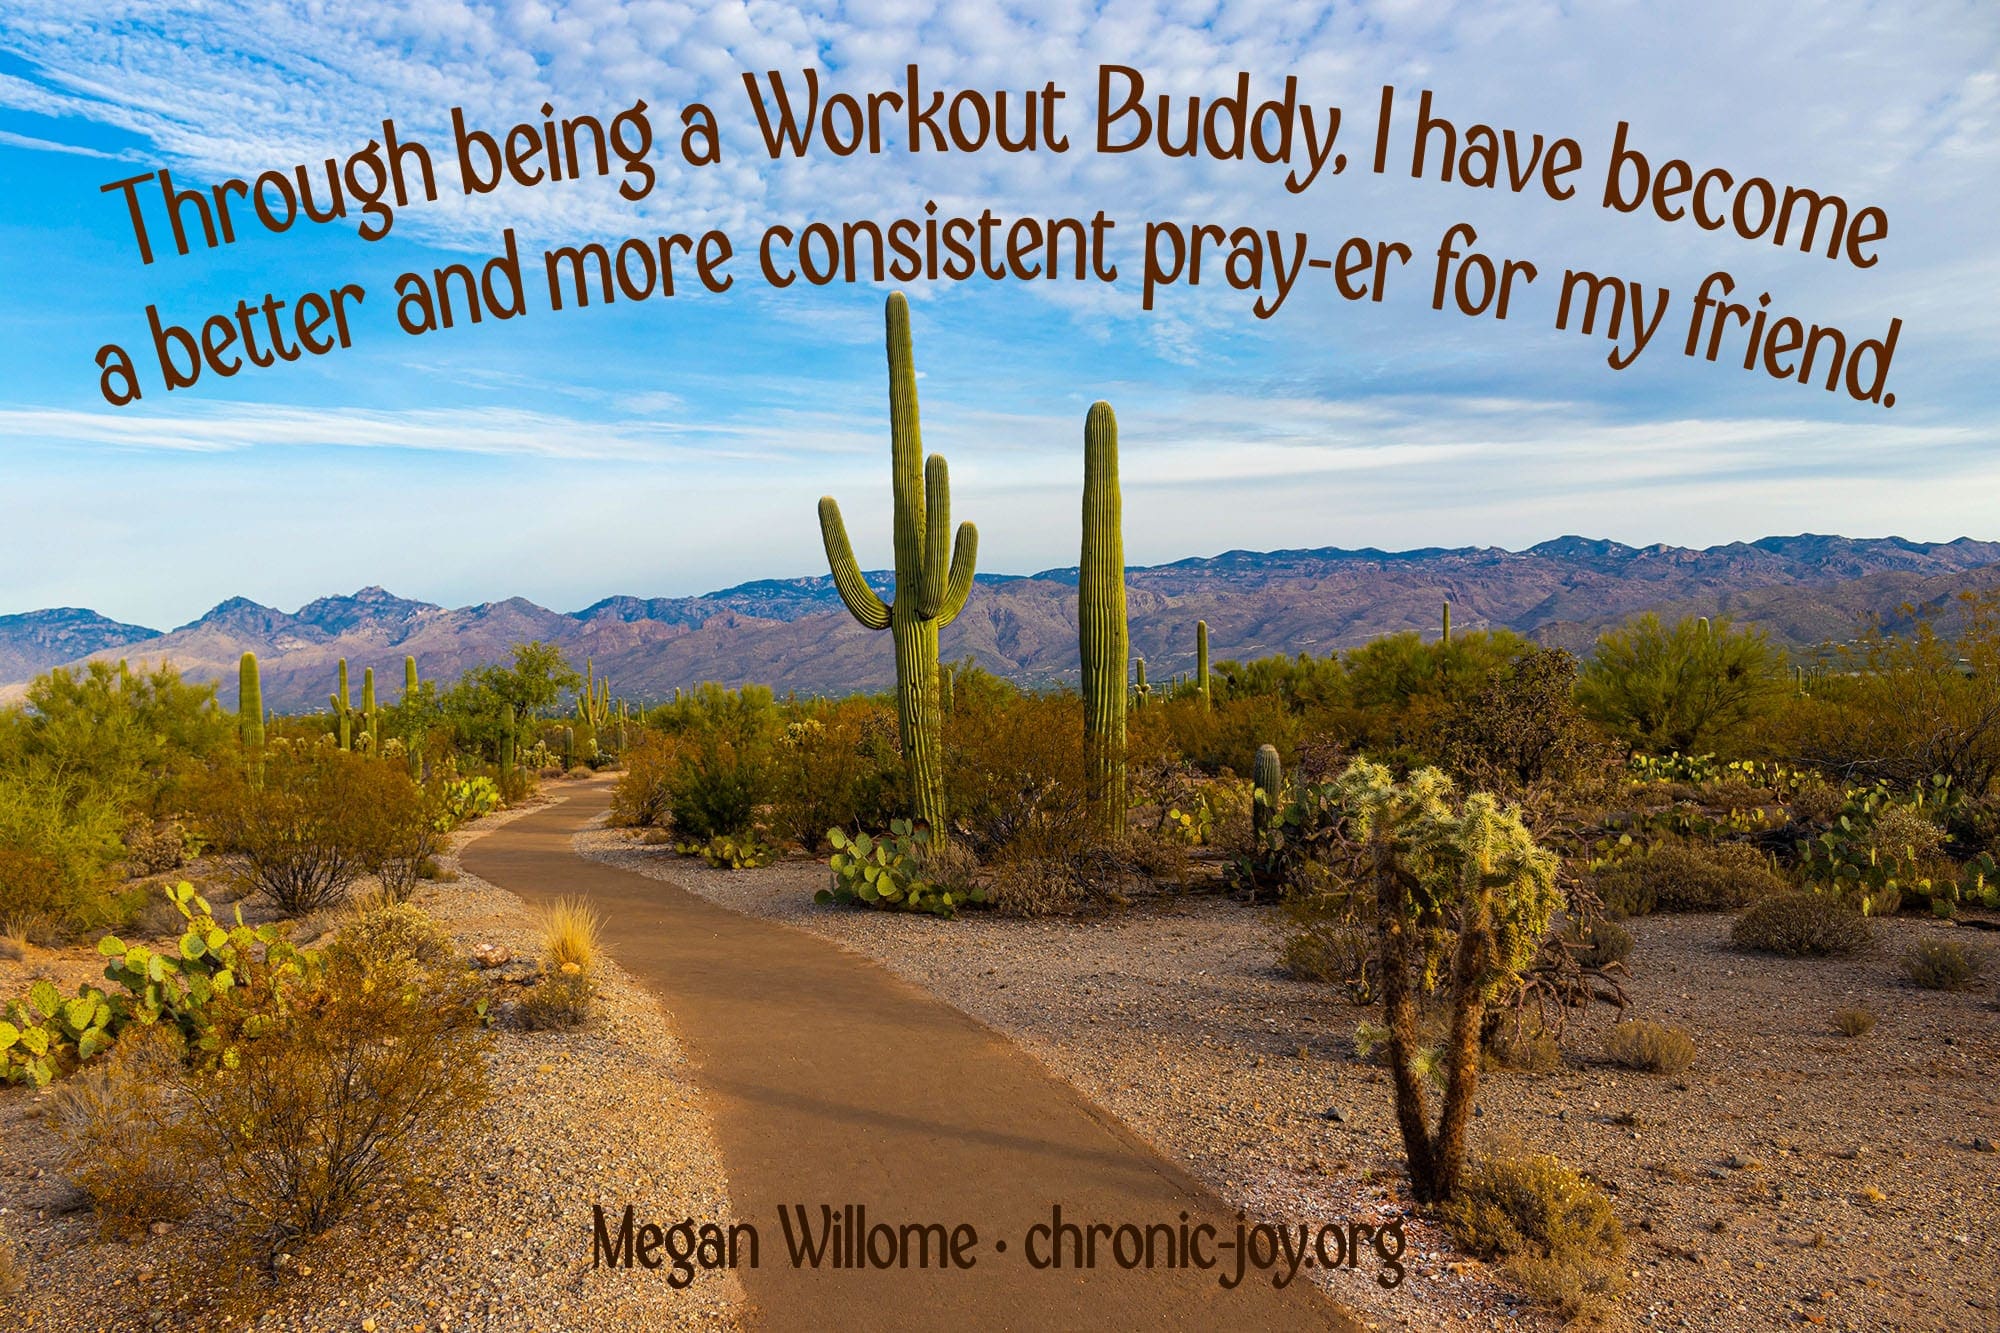 "Through being a Workout Buddy, I have become a better and more consistent pray-er for my friend." Megan Willome